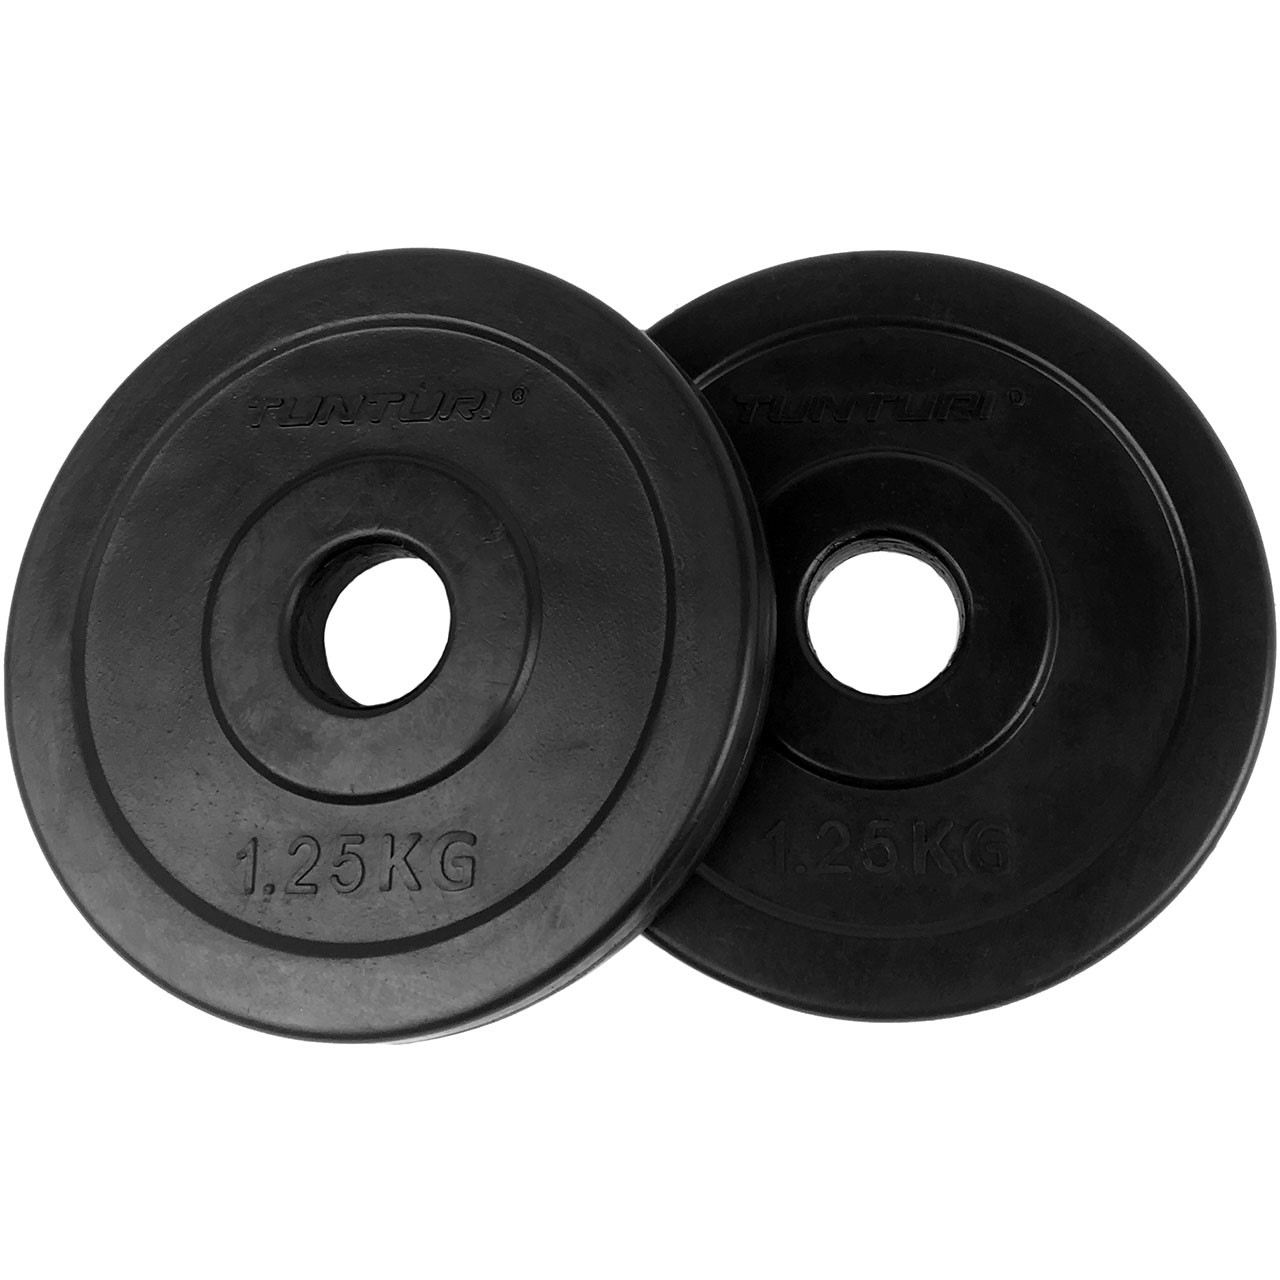 Rubber Coated 1.25 kg Tunturi Weight Disc Pair 30 mm